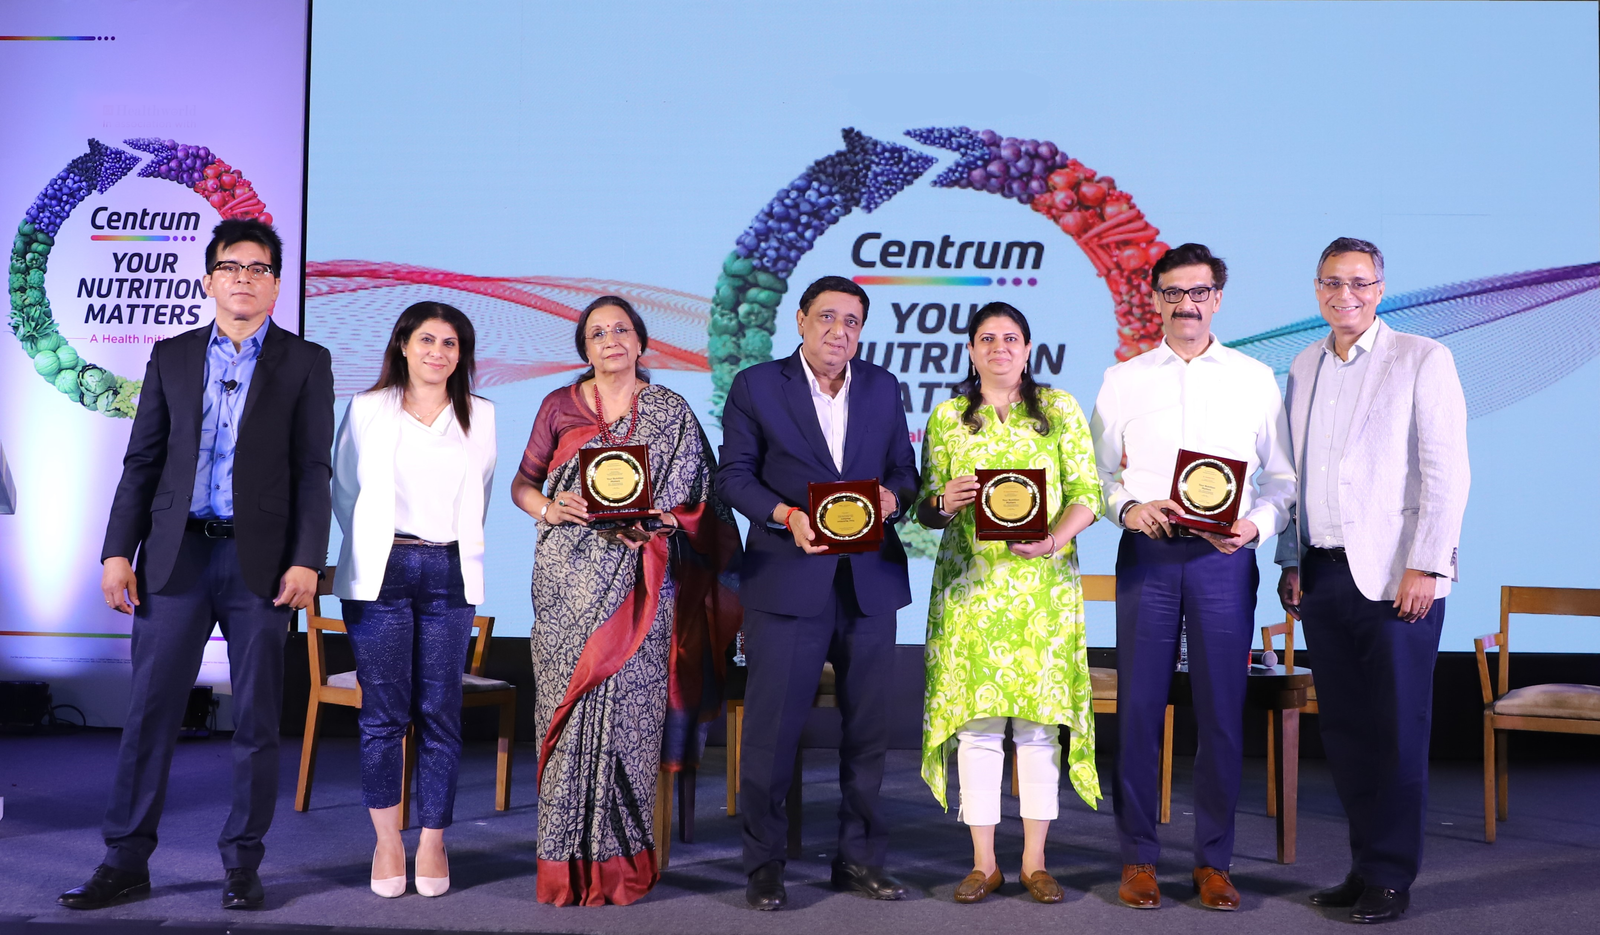 Centrum launches ‘Your Nutrition Matters’ health initiative 